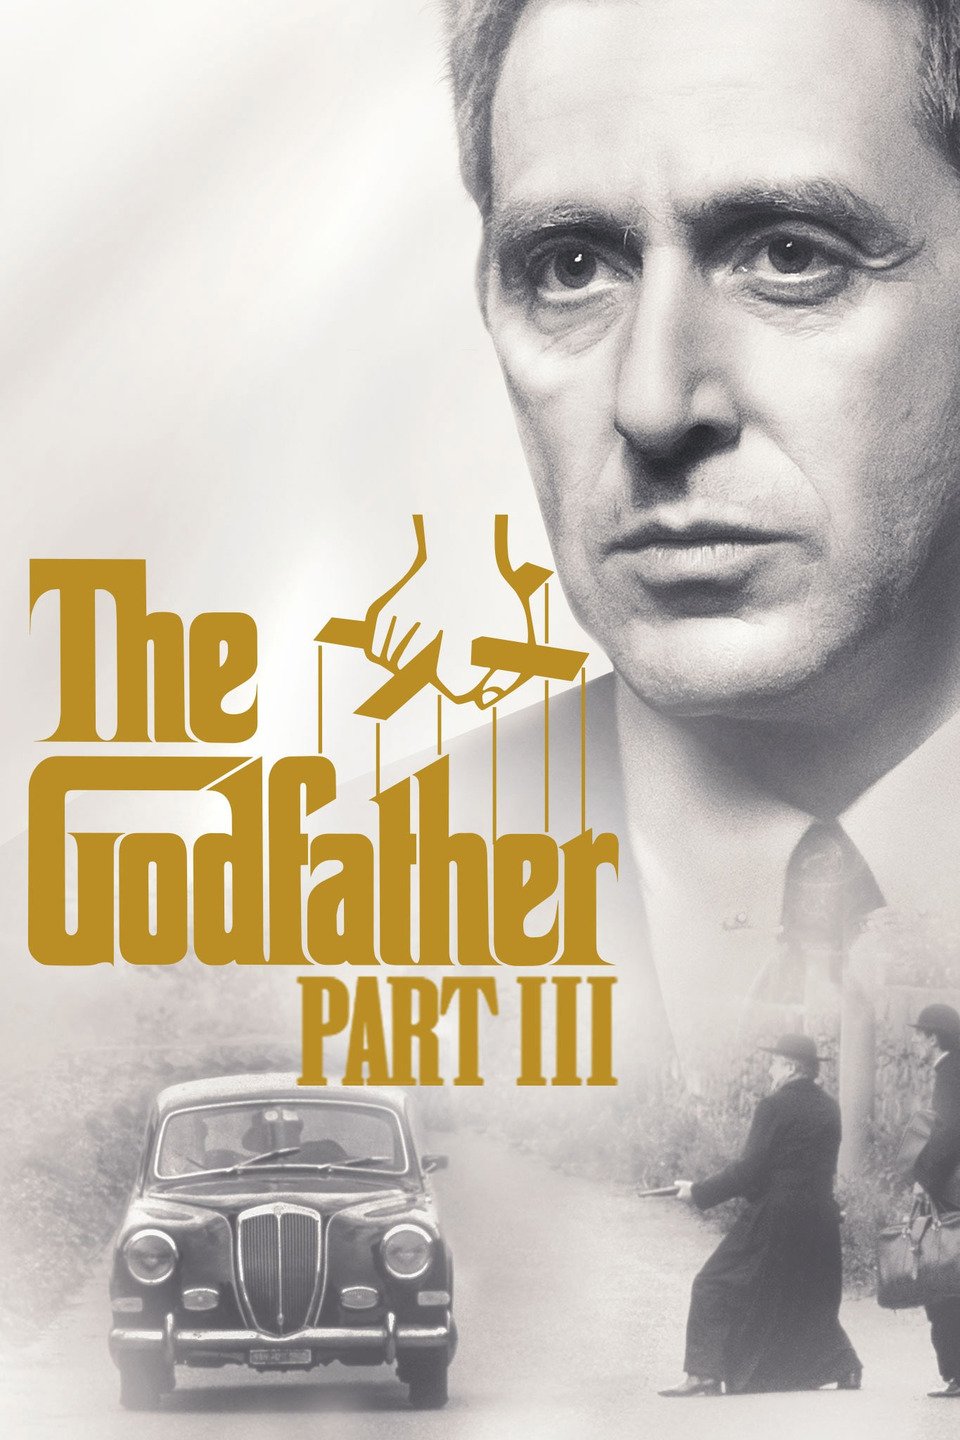 Top 44 The Godfather 2 Imdb Update - Countrymusicstop.com